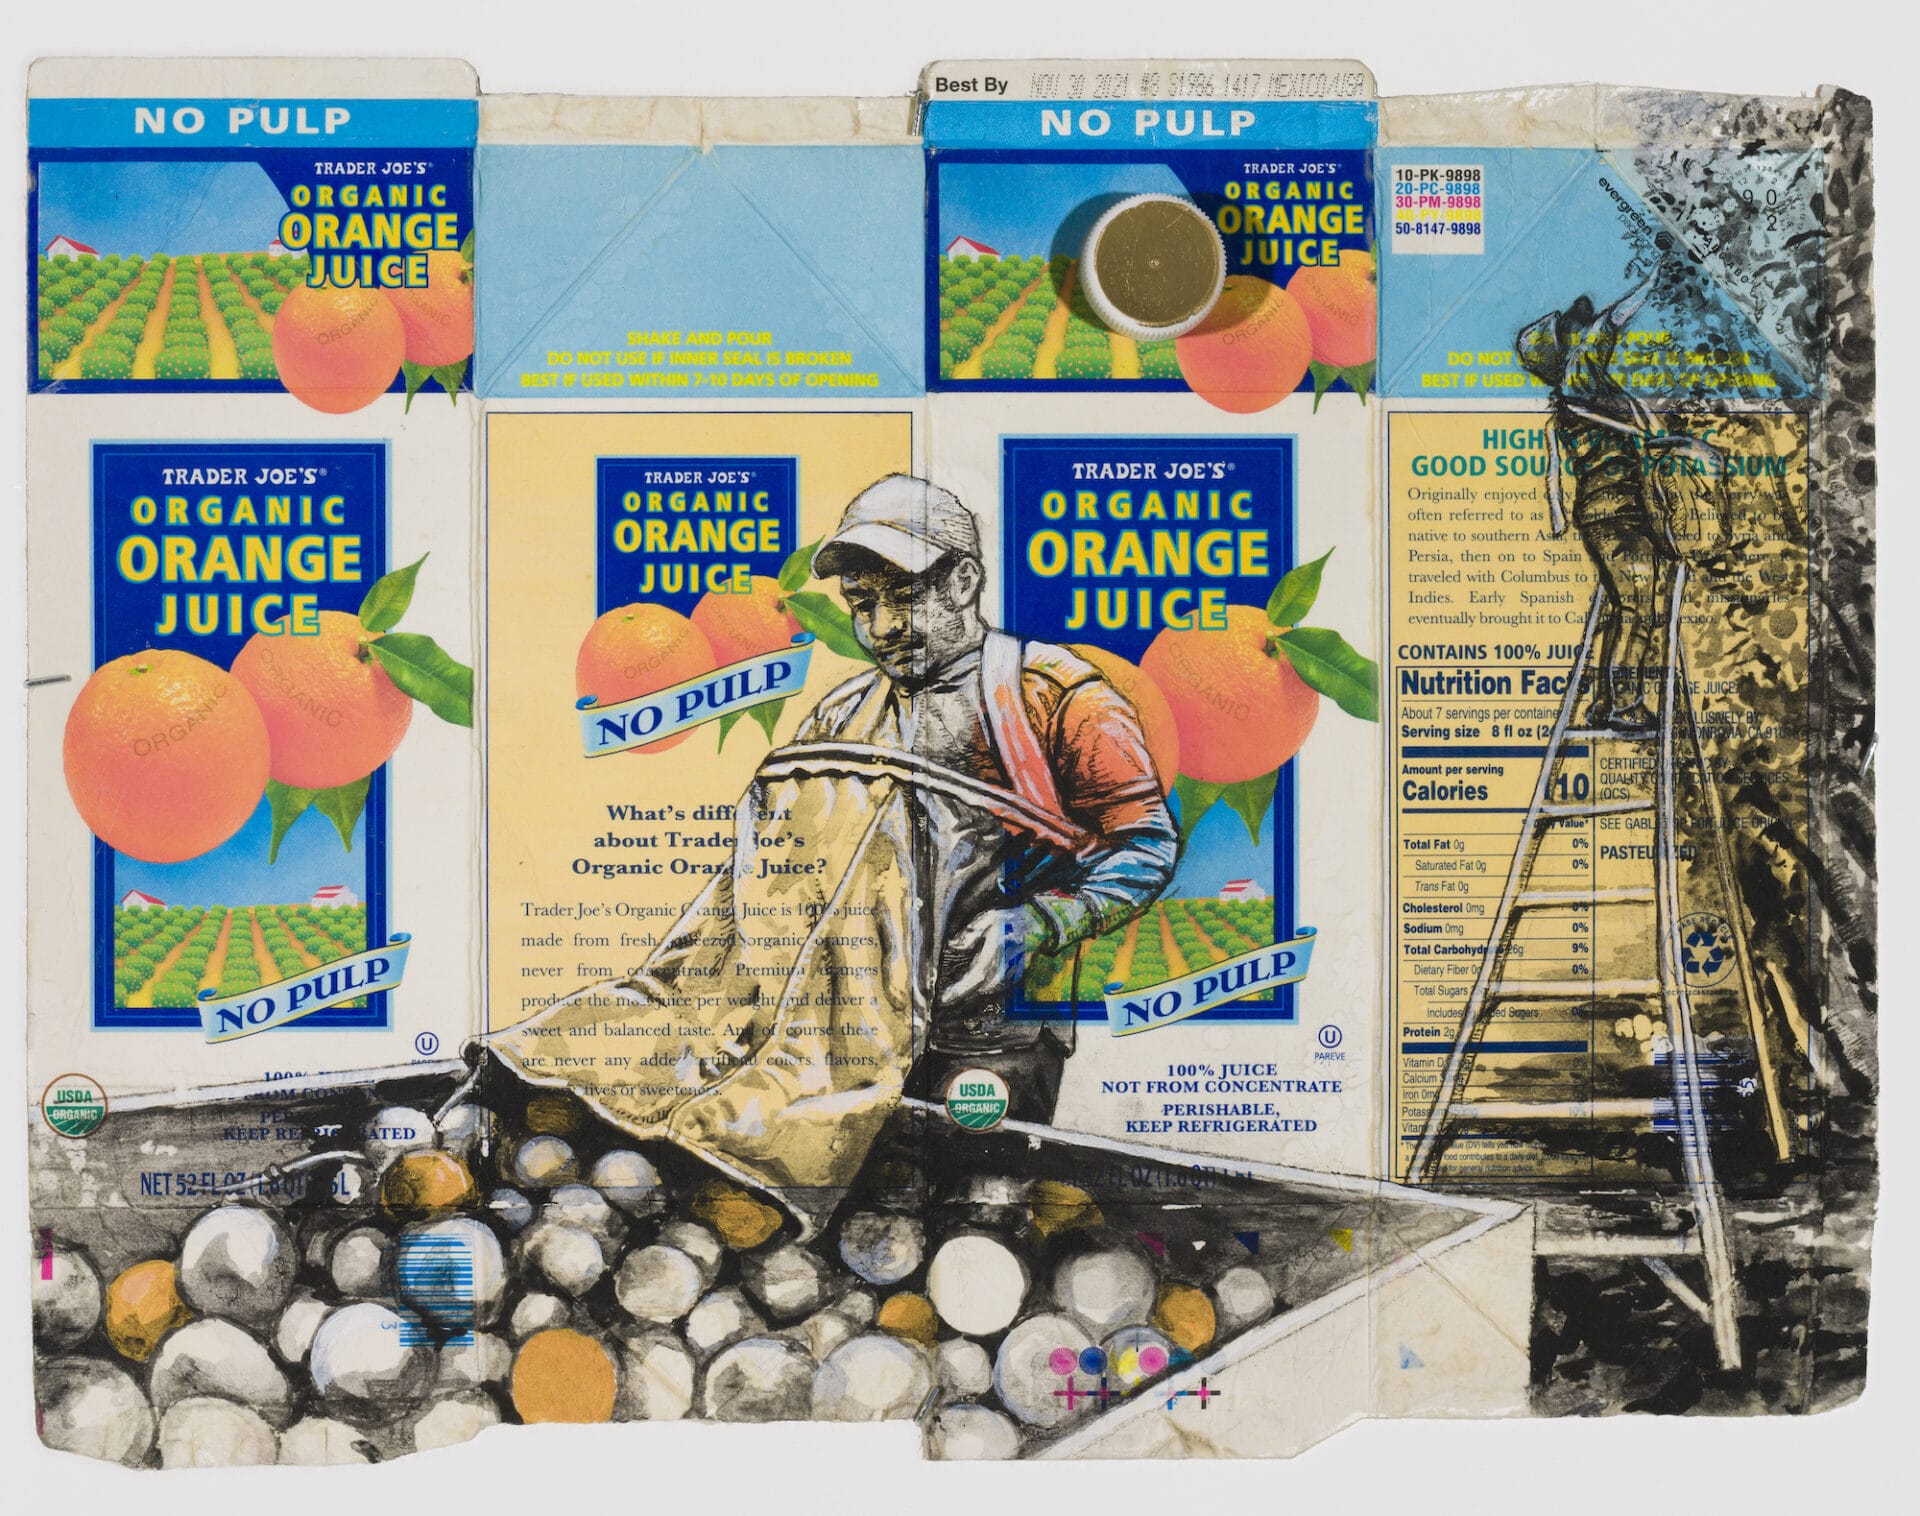 A portrait of a farmworker next to his ladder on the inside of a produce box.